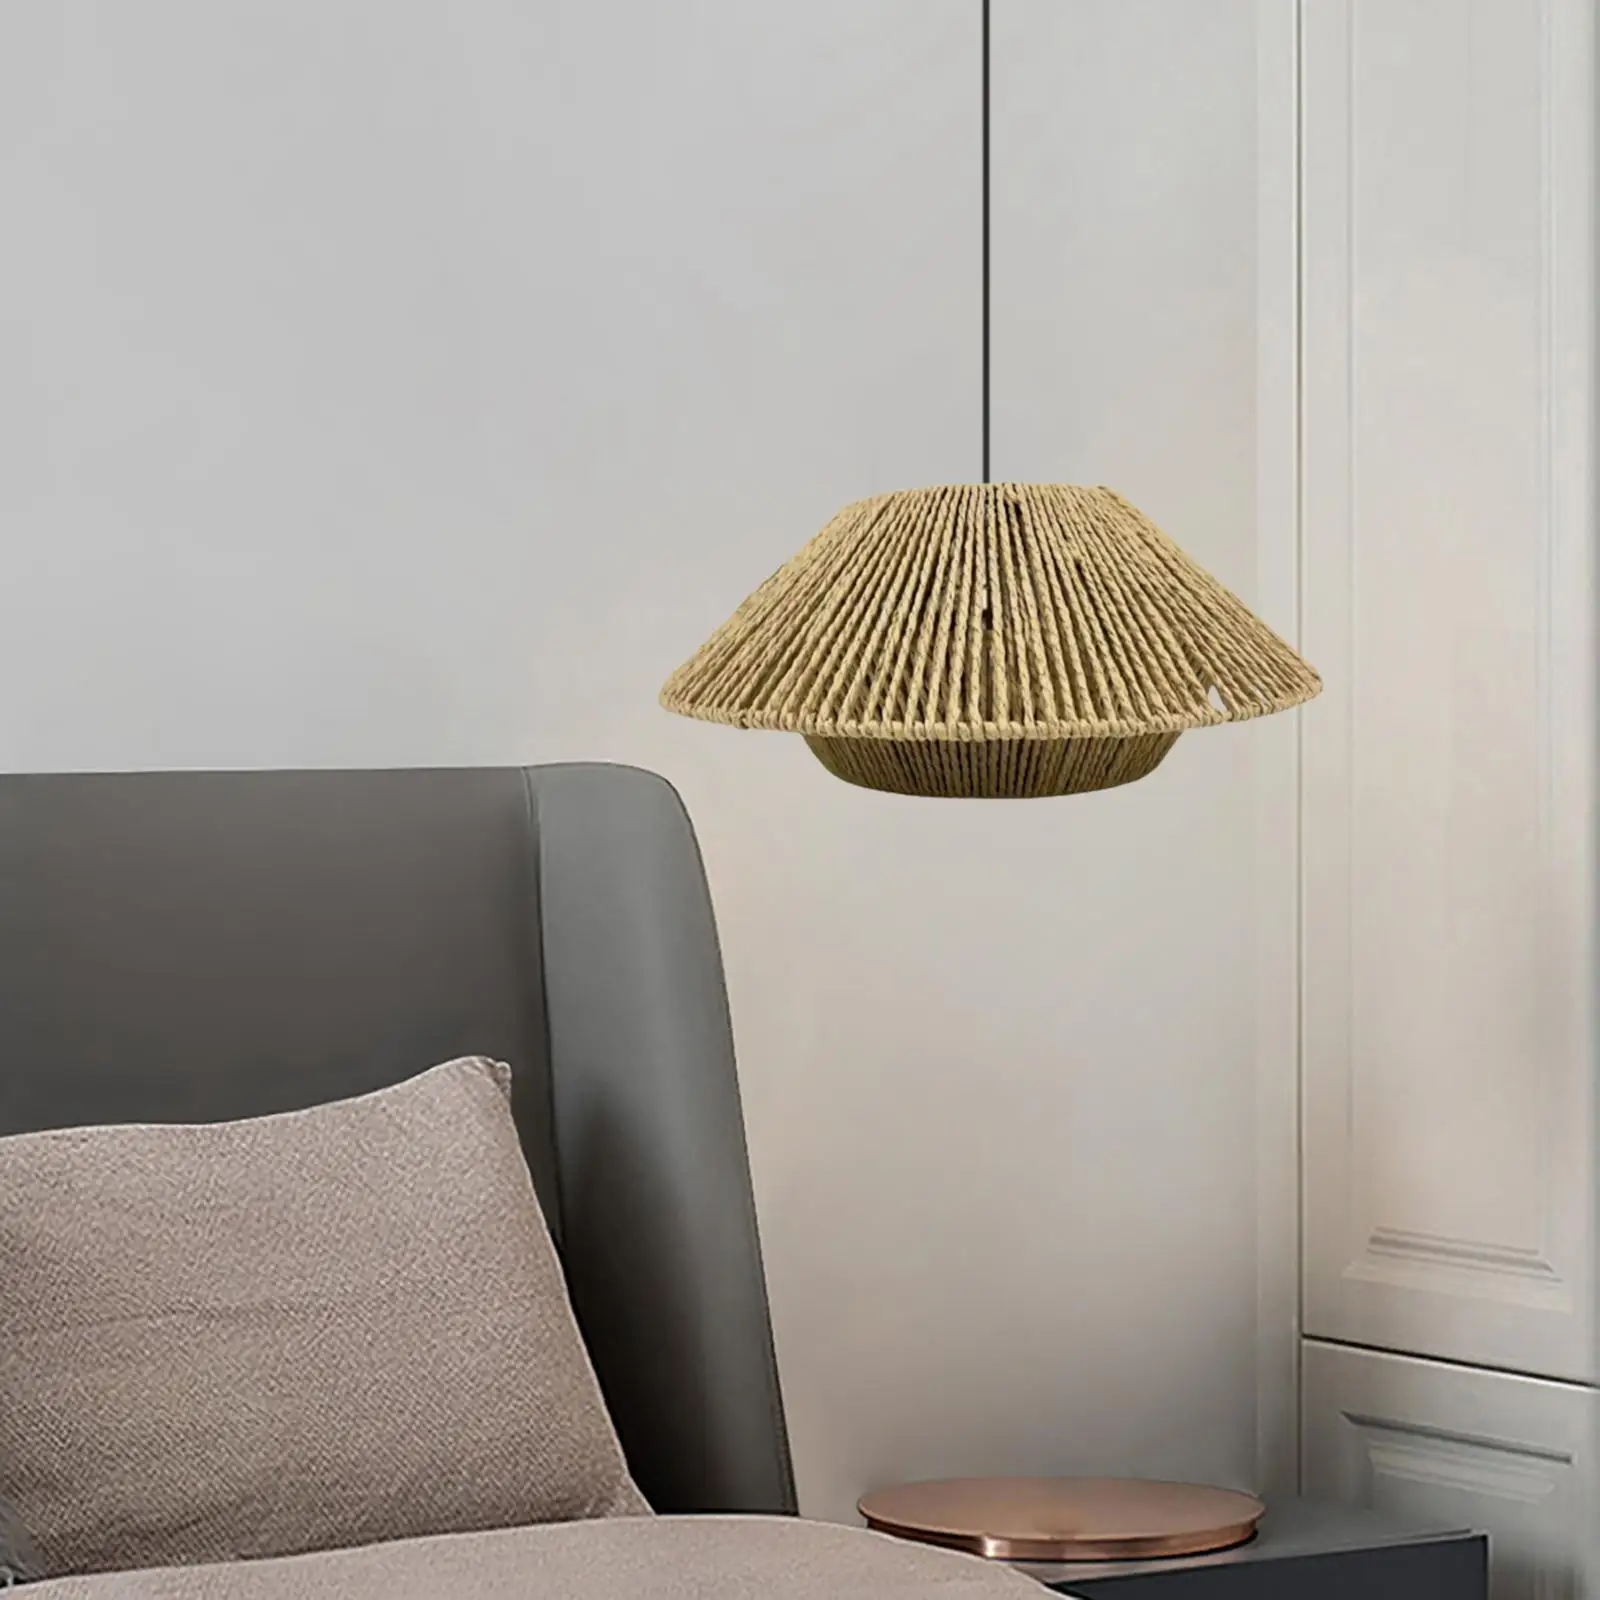 Handwoven Rope Lampshade Reading Light Lanterns Ceiling Light Fixture Cover Pendant Lamp Shades for Kitchen Island Dining Room